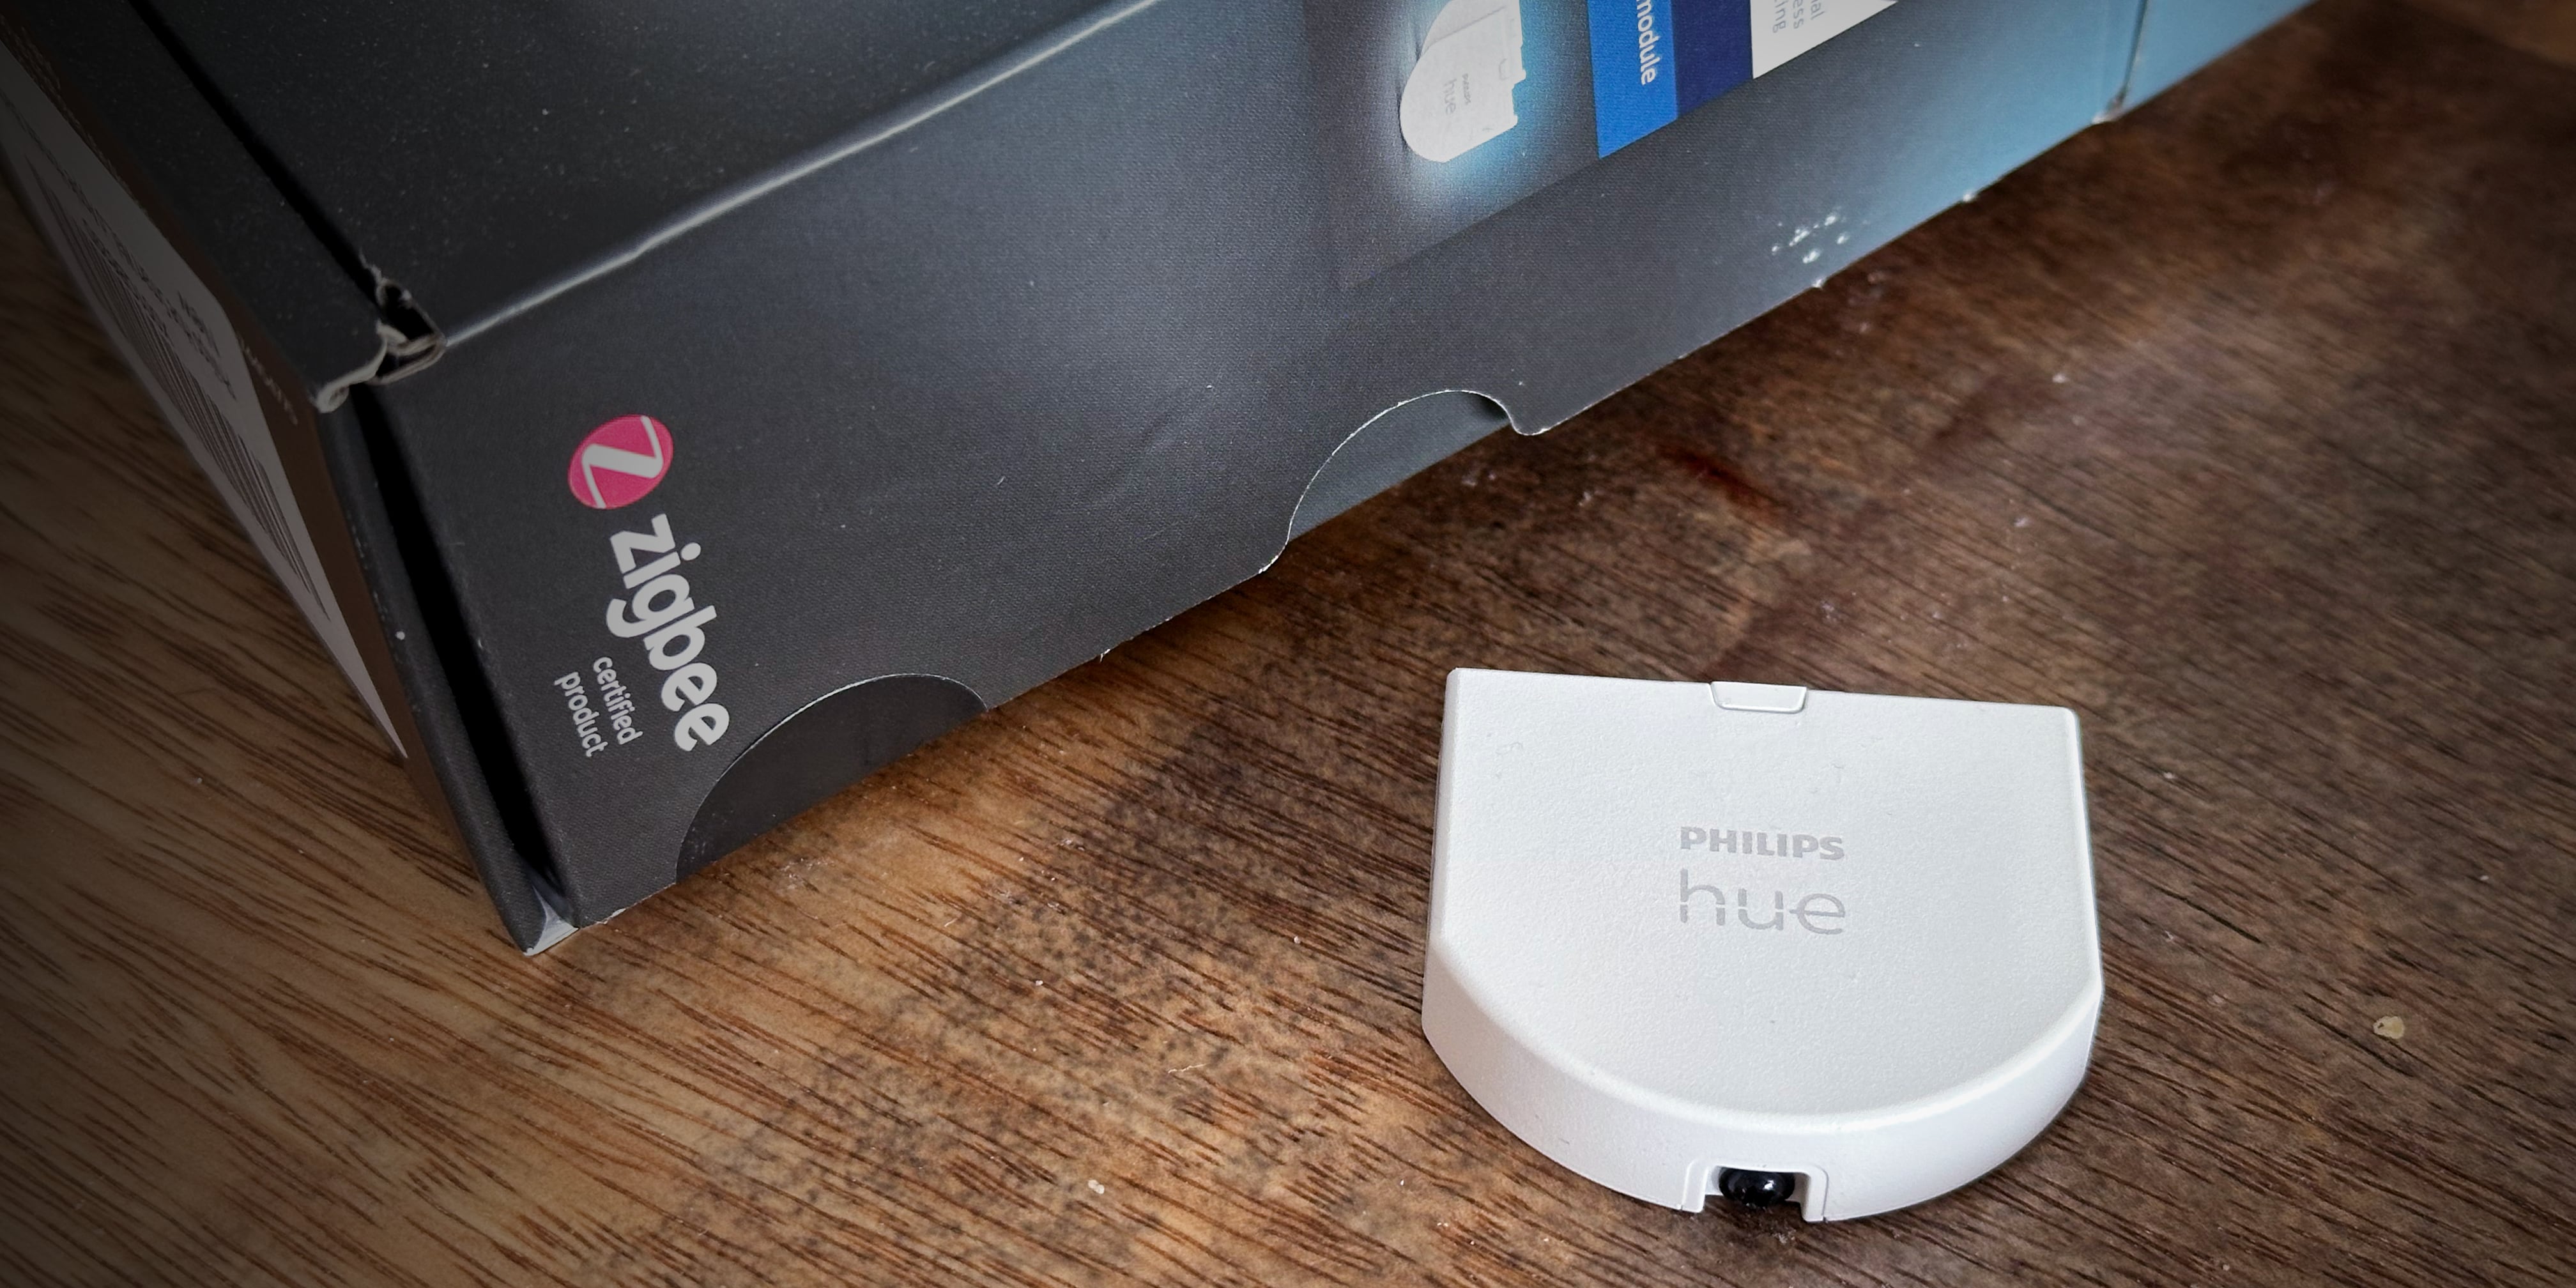 Philips Hue Review: the Wall Switch module makes your existing light  switches smart - 9to5Mac